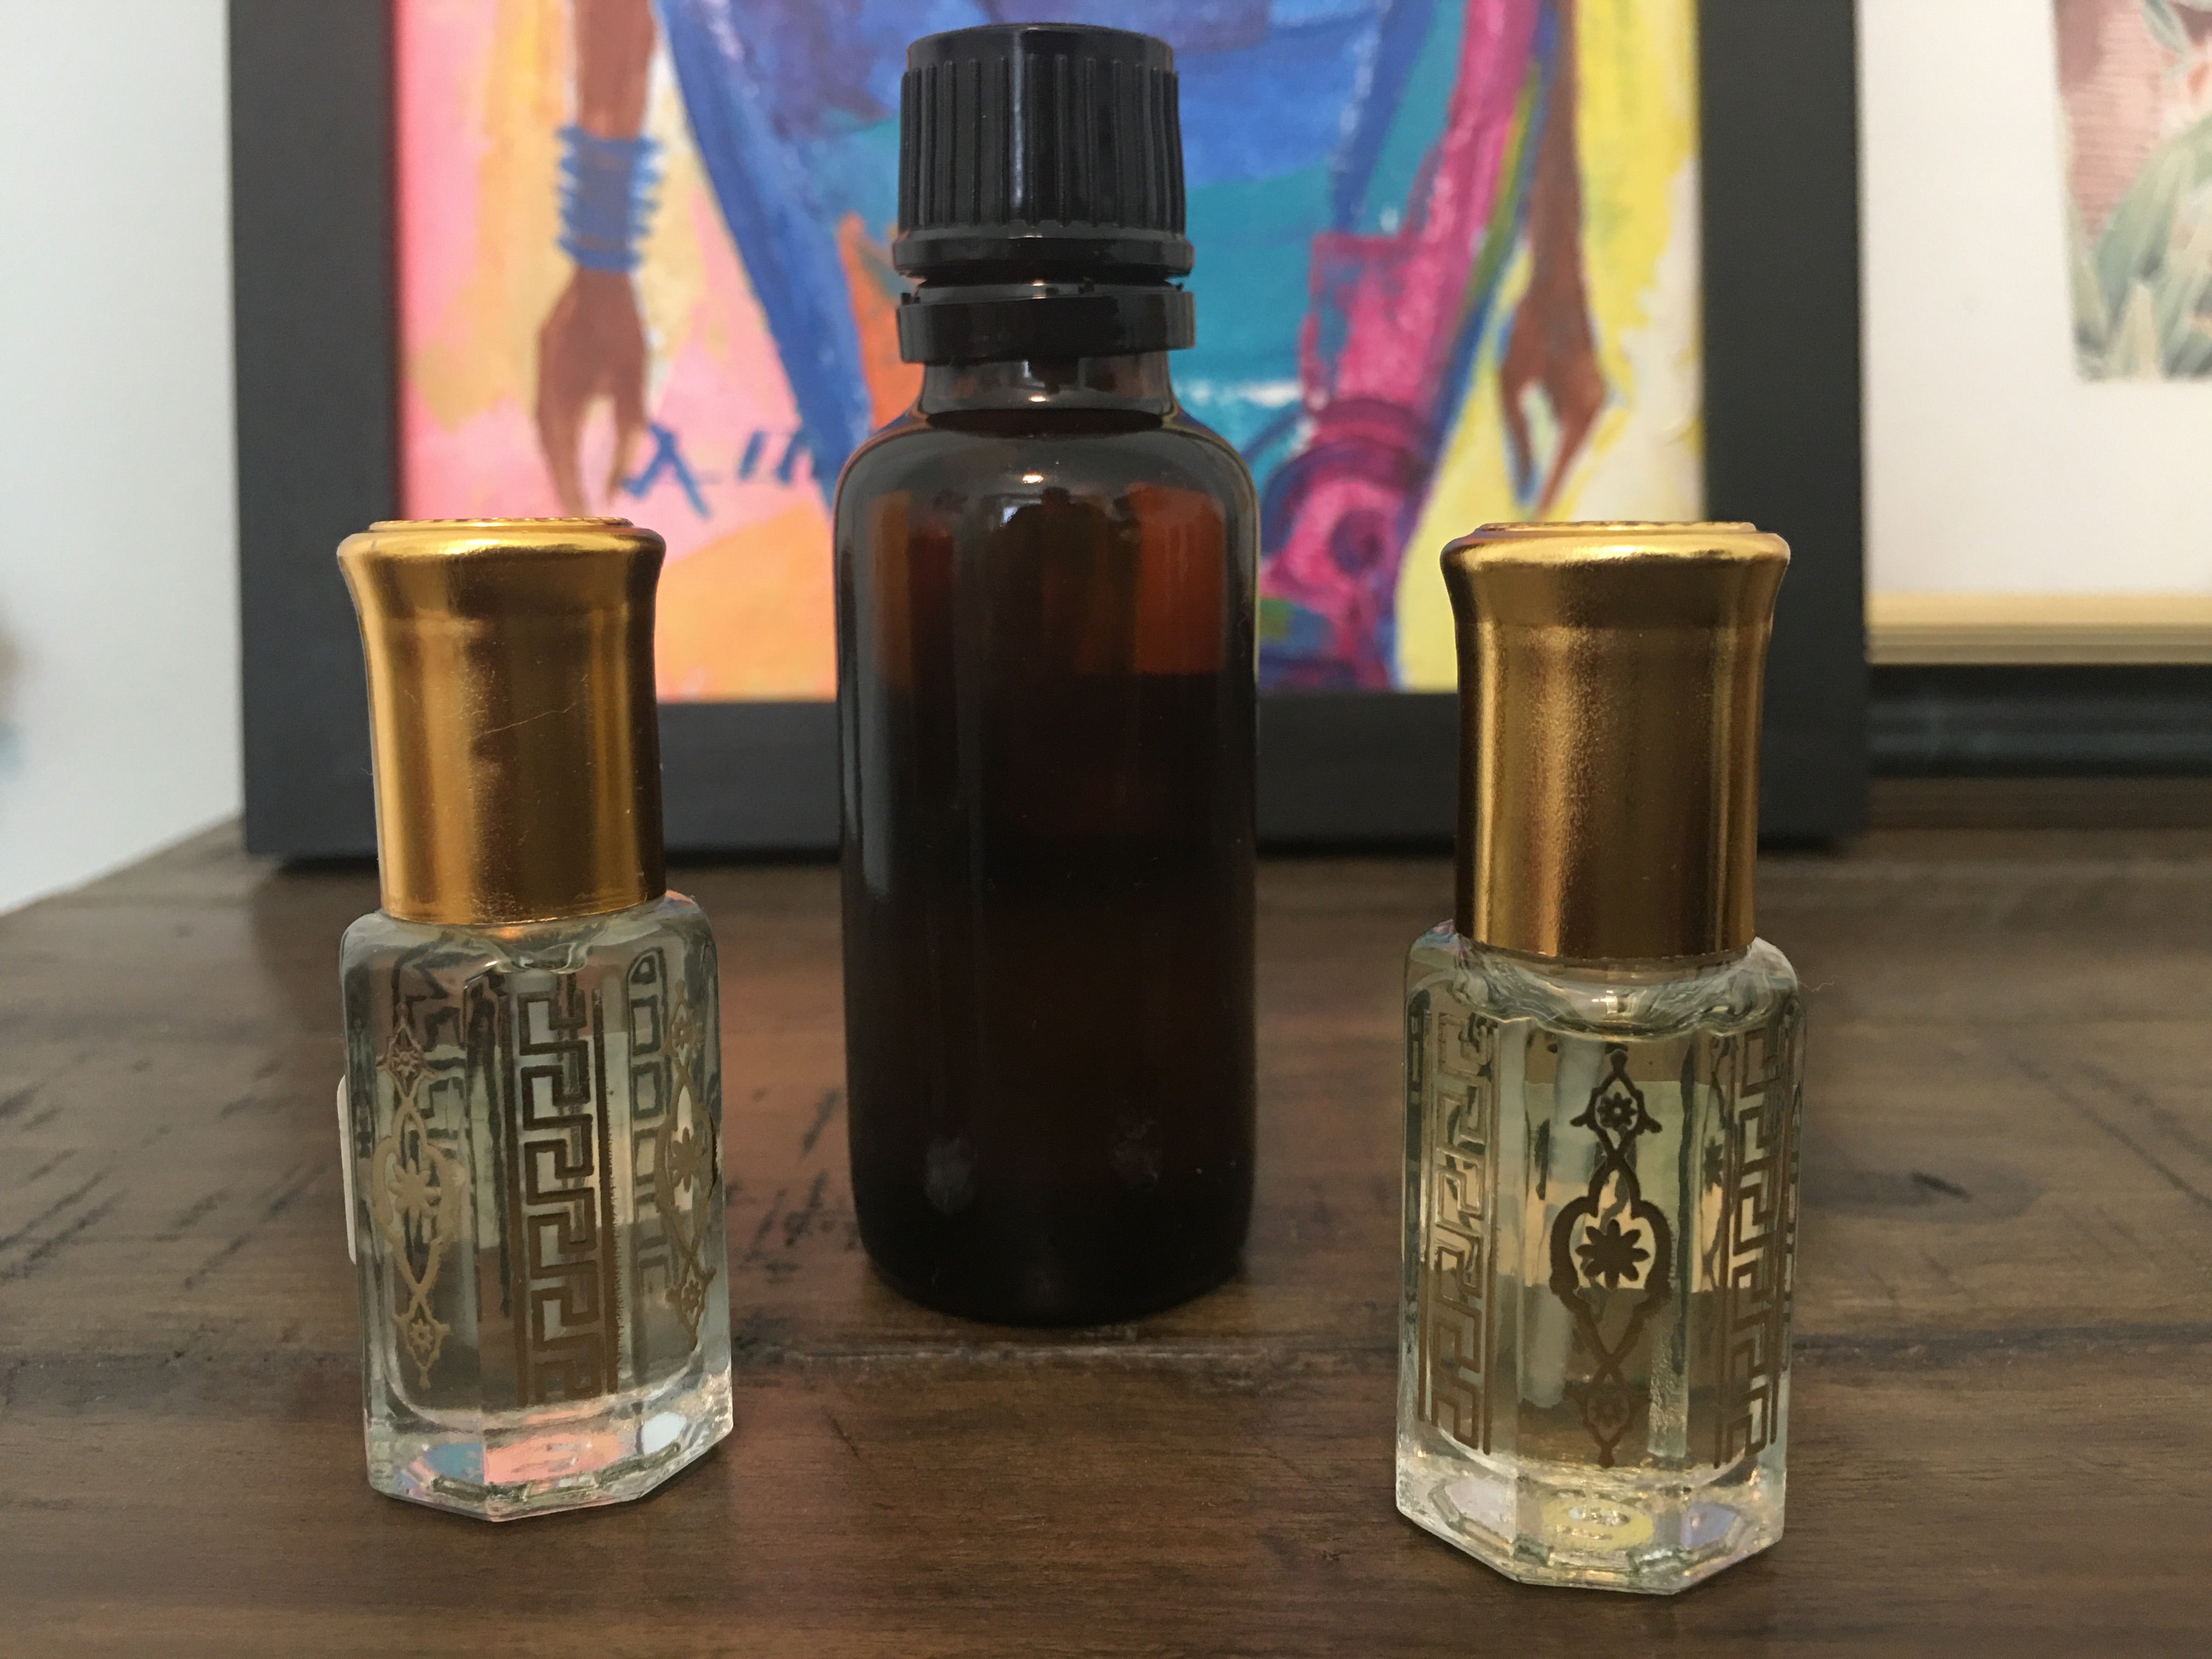 THREE NEW DIFFUSER ESSENTIAL OIL BLENDS